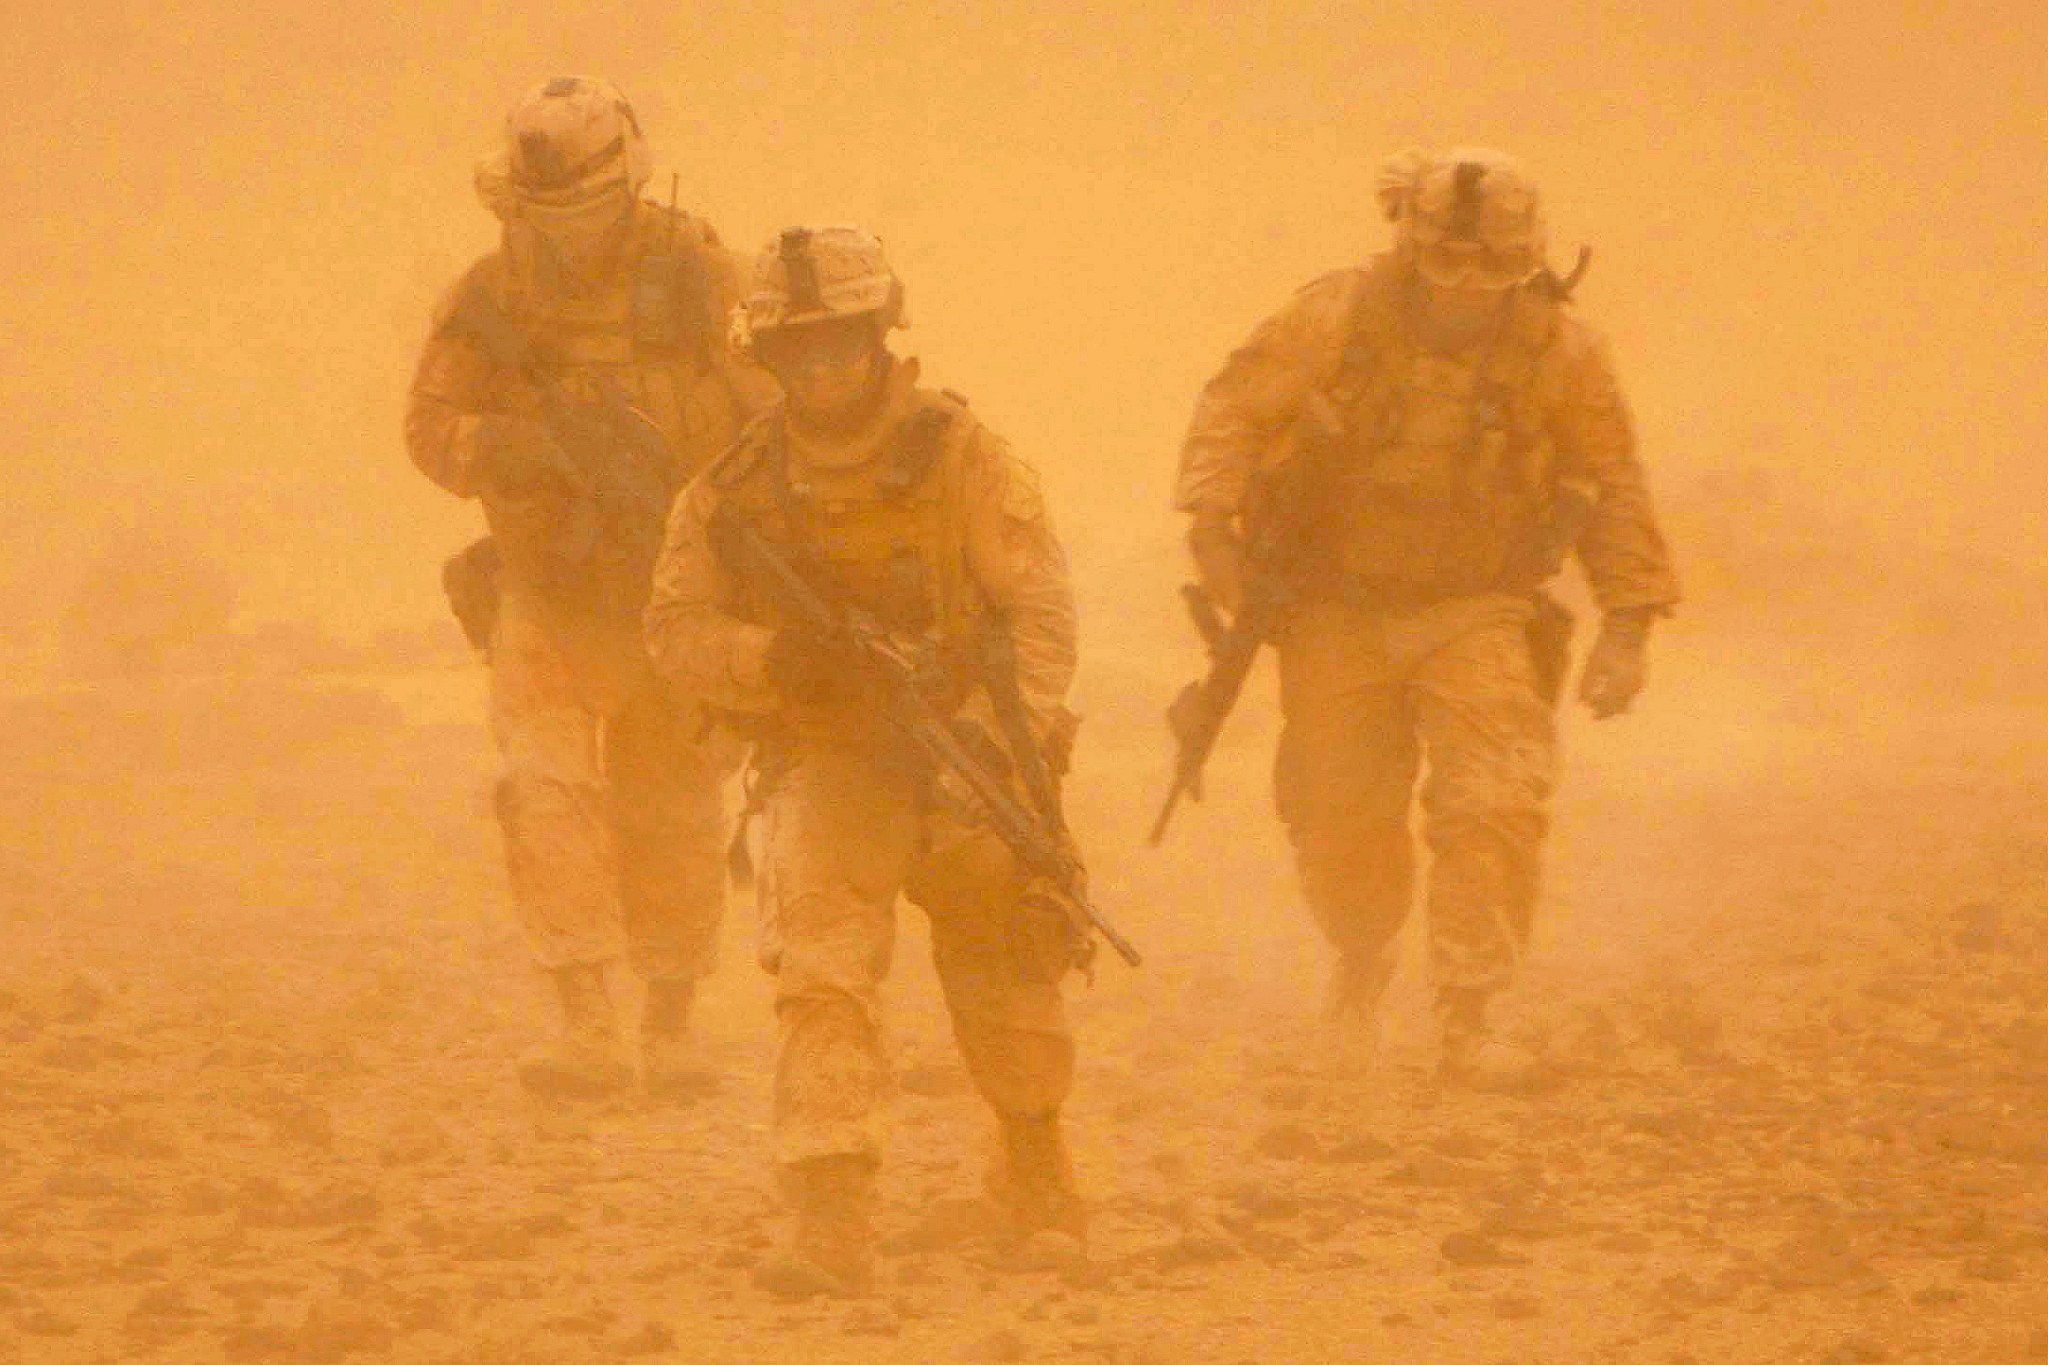 U.S. Marines make their way back to their vehicles in the middle of a sandstorm after patrolling a nearby mountain ridge in Bakwa, Farah province, Afghanistan, May 3, 2009. 